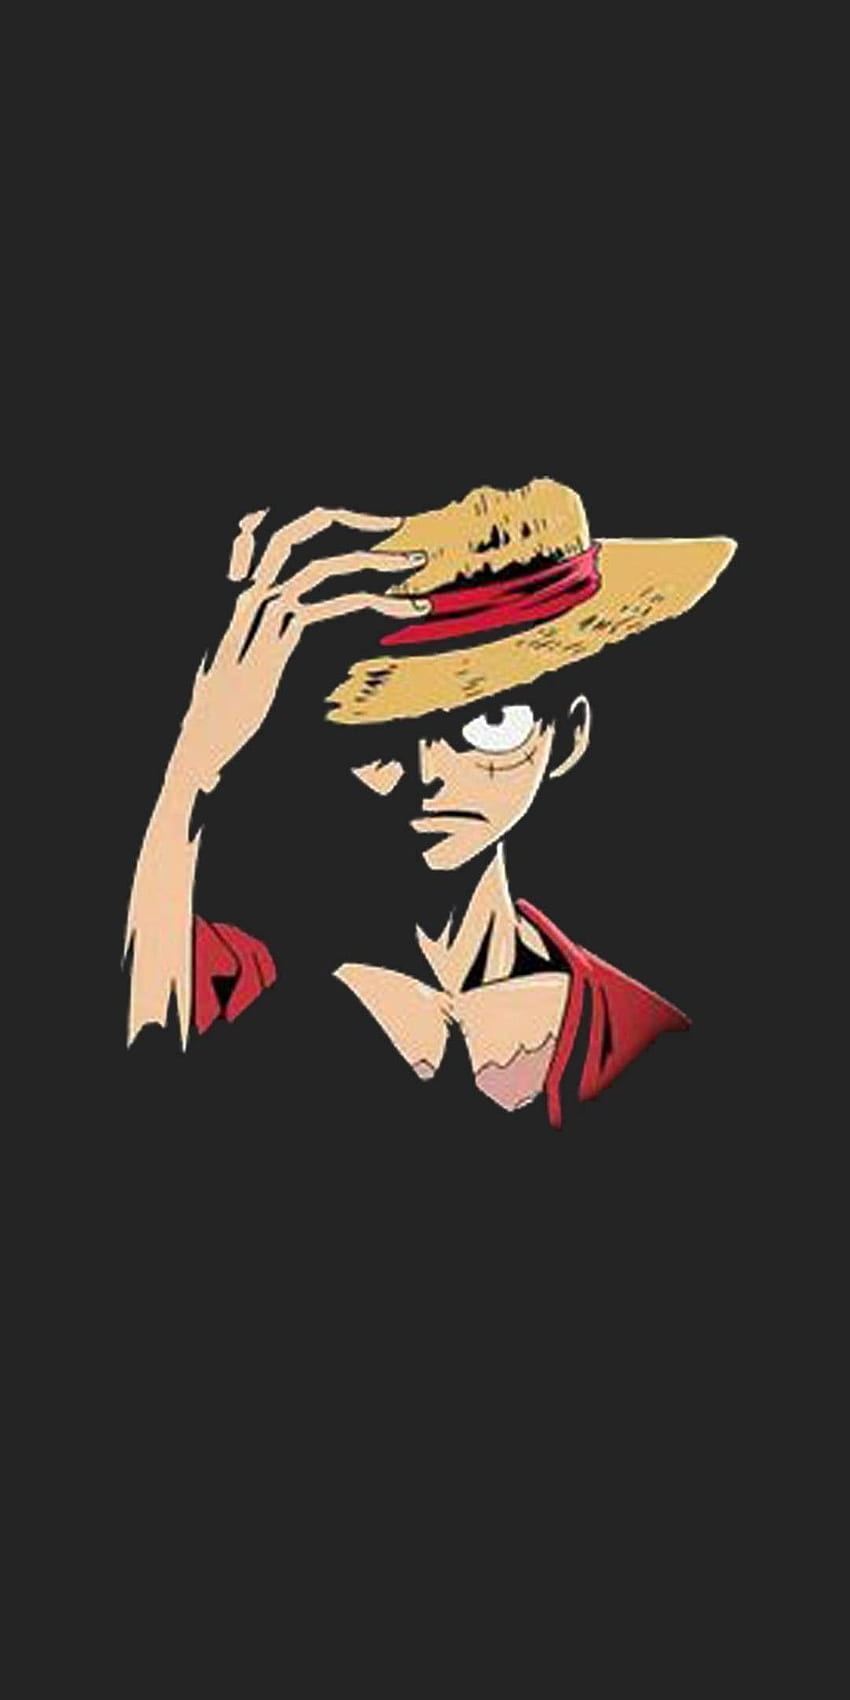 100+] One Piece Phone Wallpapers | Wallpapers.com